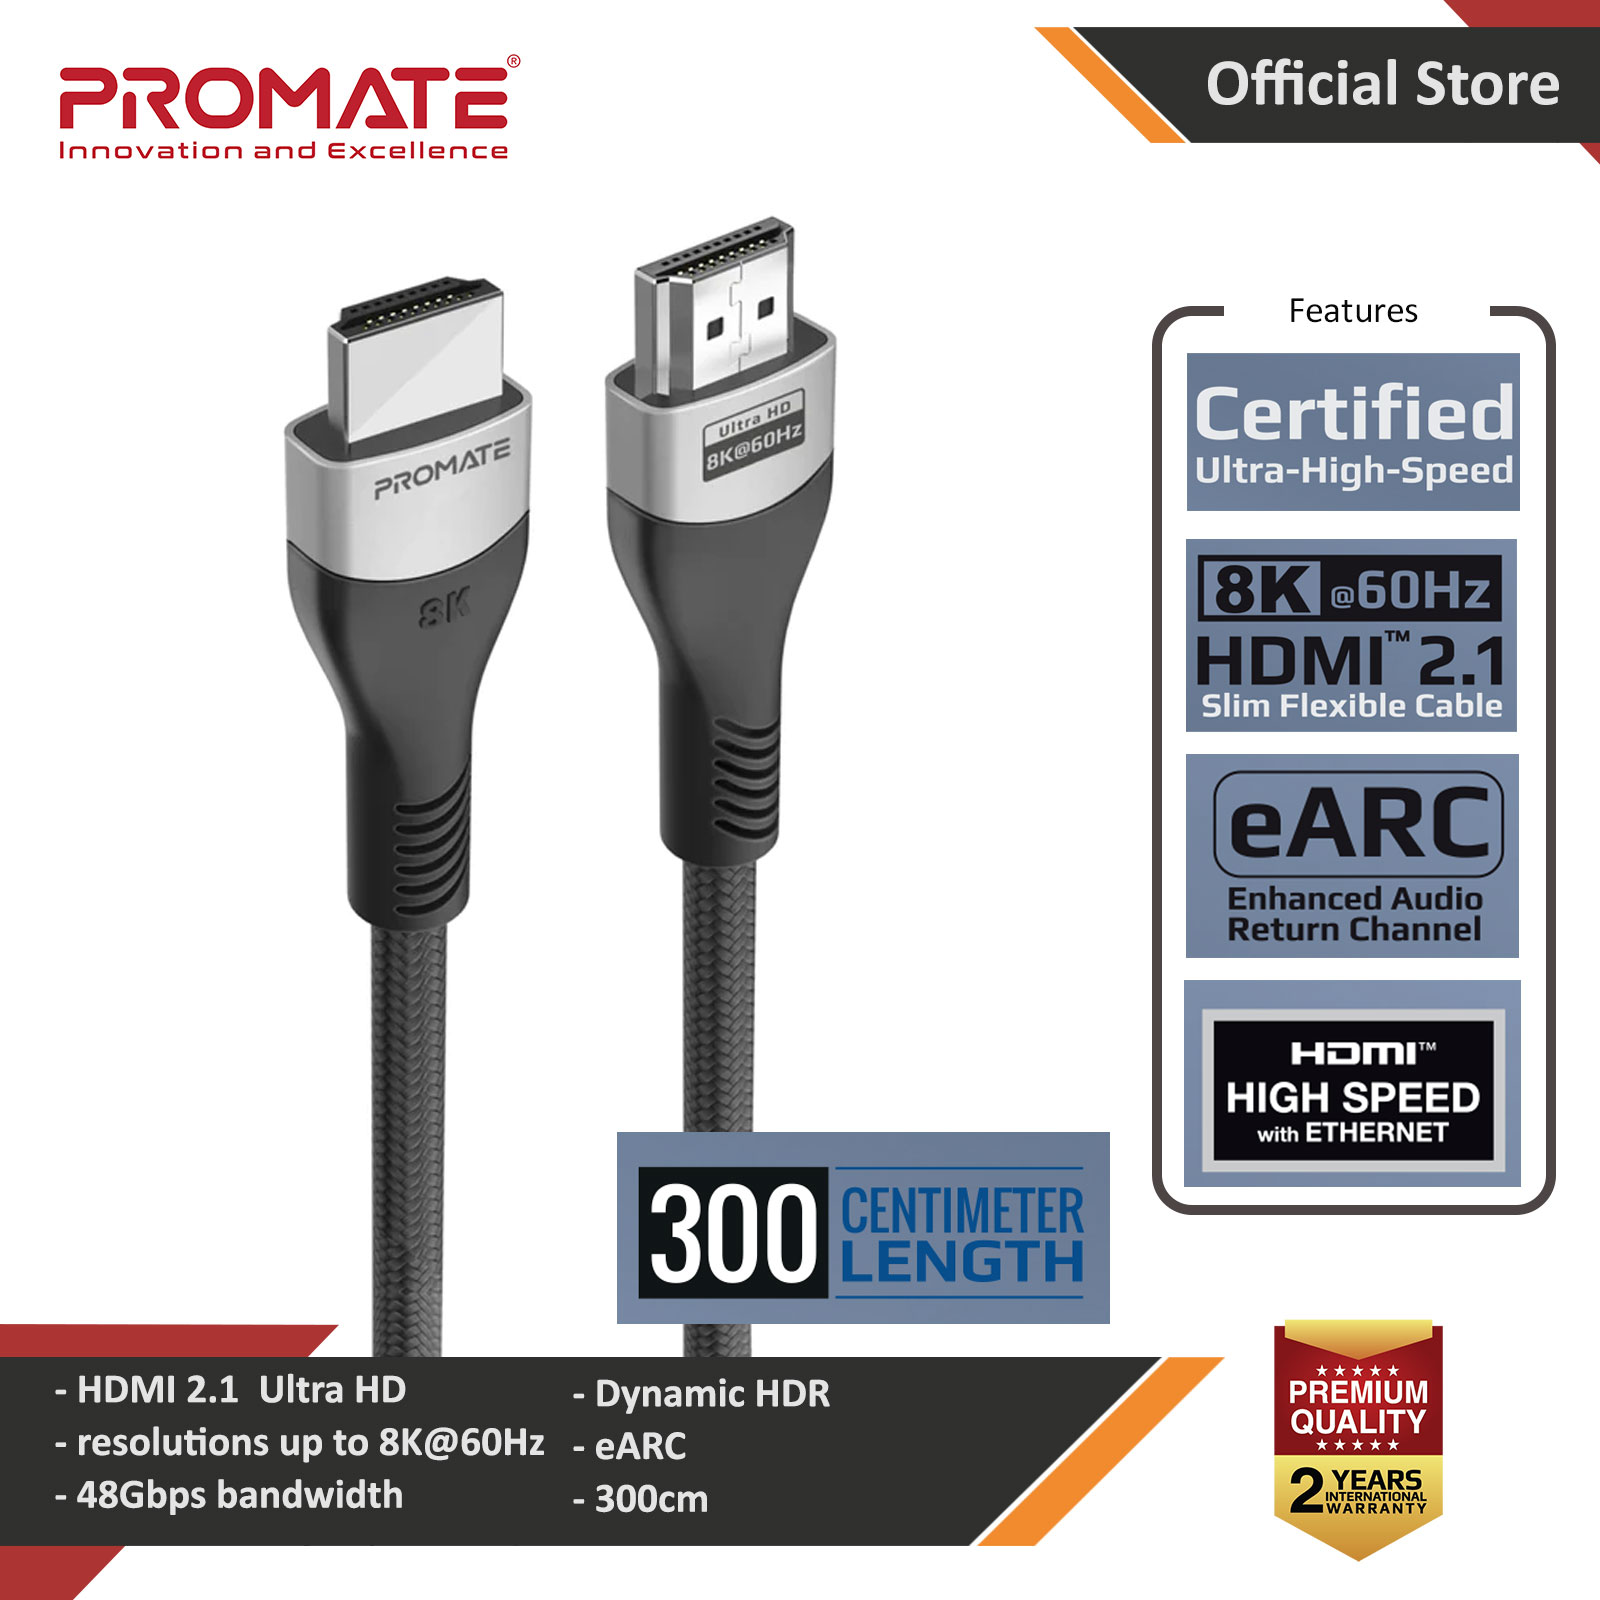 Picture of PROMATE Primelink8K-300 Ultra HD High Speed 8K HDMI 2.1 Ultra HD Audio Video Cable HDR Colour Support eARC Connectivity Dolby Vision 3 meter Plug and Play 300cm Cable Length Red Design- Red Design Cases, Red Design Covers, iPad Cases and a wide selection of Red Design Accessories in Malaysia, Sabah, Sarawak and Singapore 